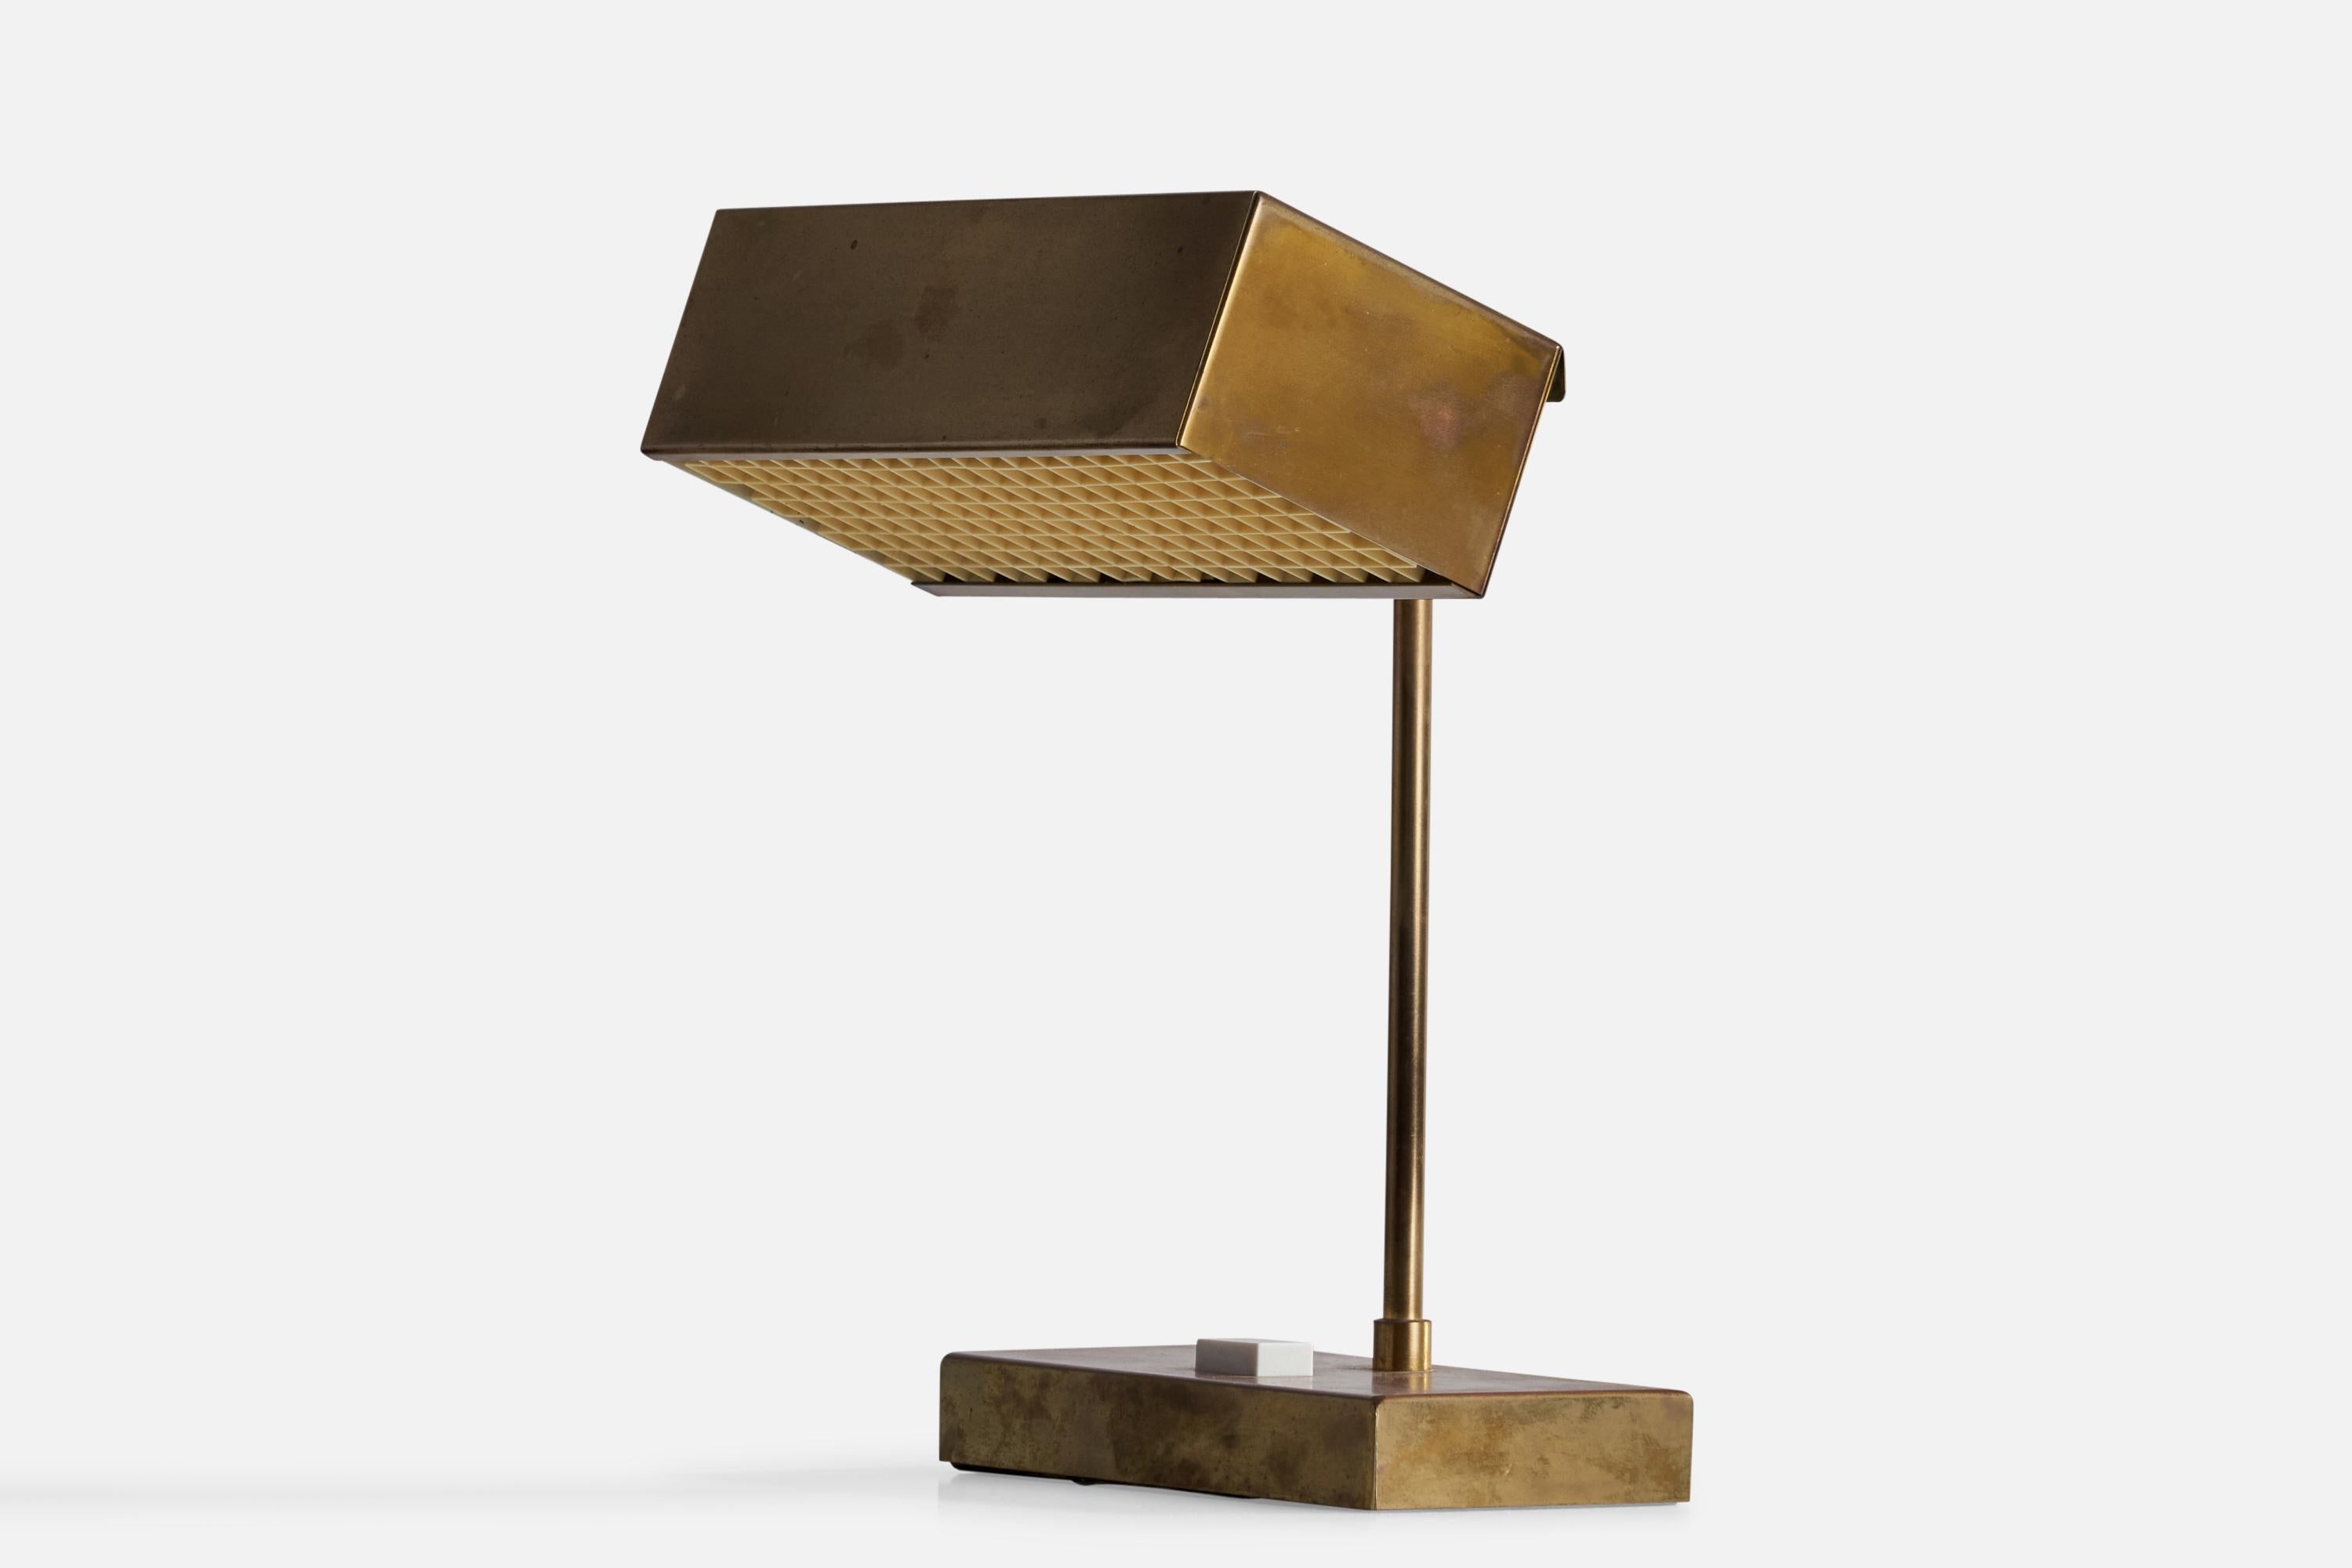 An adjustable brass and acrylic “Elidus” Table Lamp designed by Björn Svensson, Sweden, 1970s.

Overall Dimensions (inches): 11.25”  H x 8.25”  W x 7”  D
Stated dimensions include shade.
Bulb Specifications: E-14 Bulb
Number of Sockets: 1
All